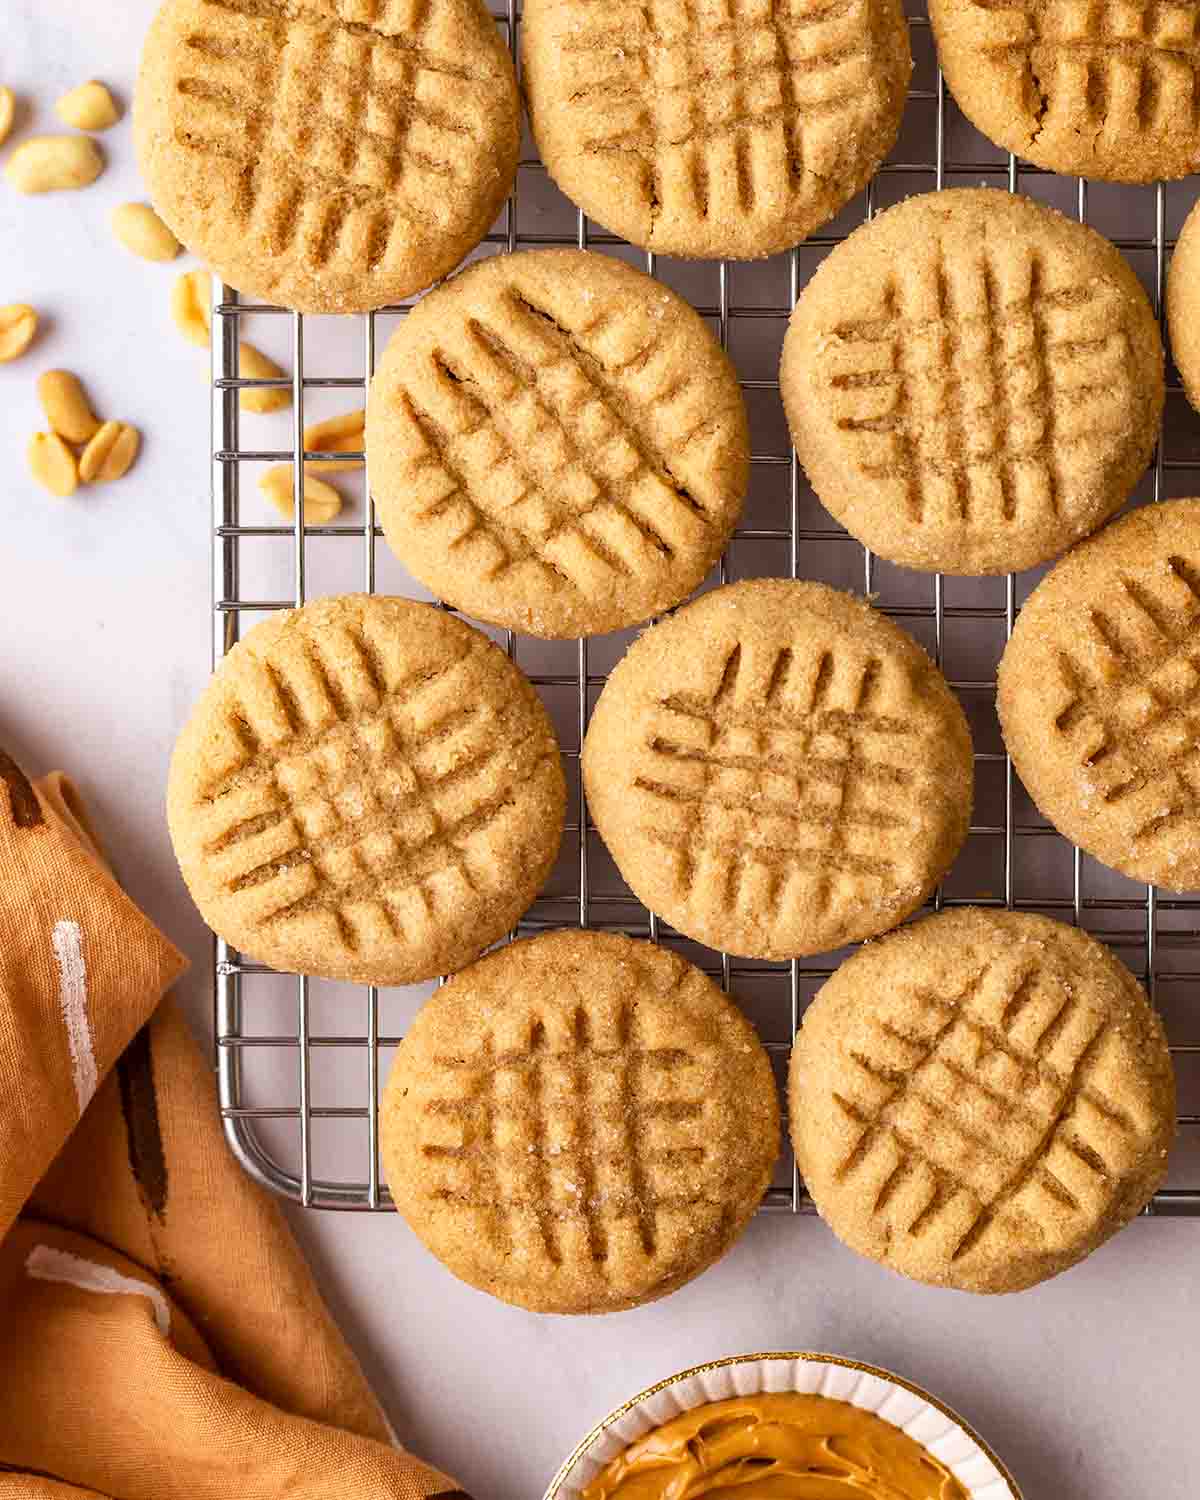 Peanut butter cookies in single layer on wire rack with peanuts, peanut butter and brown tea towel on the side.